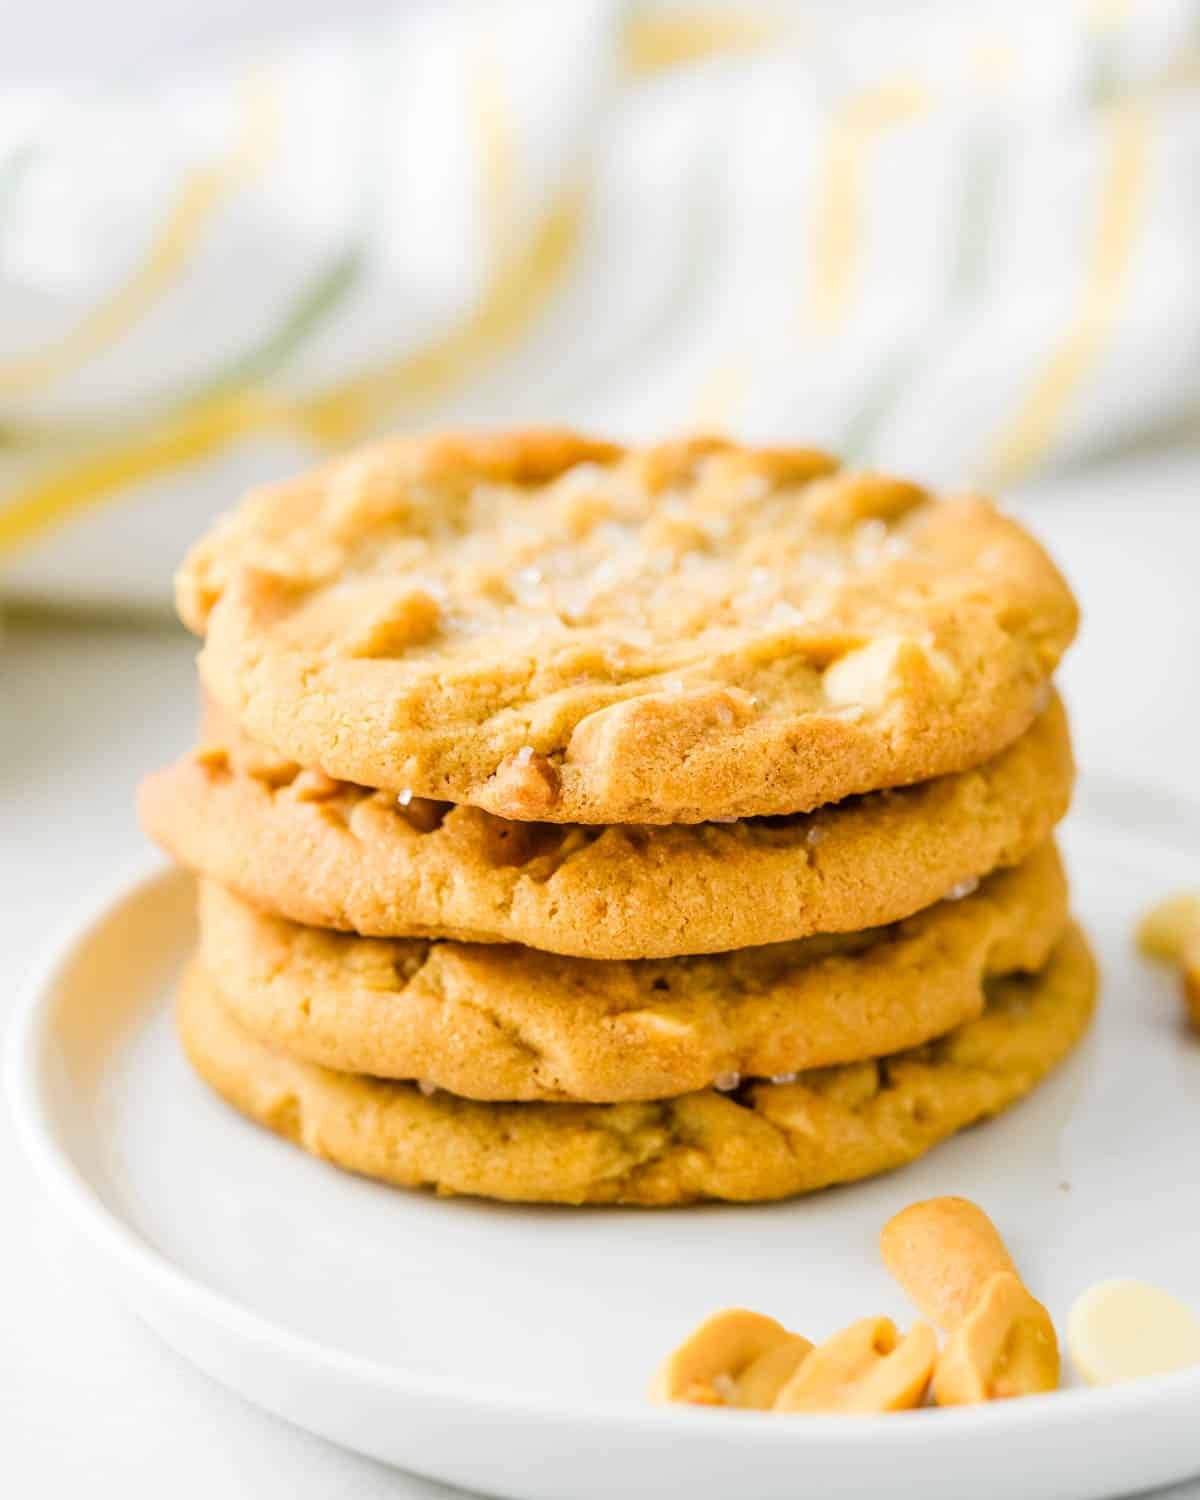 A stack of peanut butter cookies on a plate.